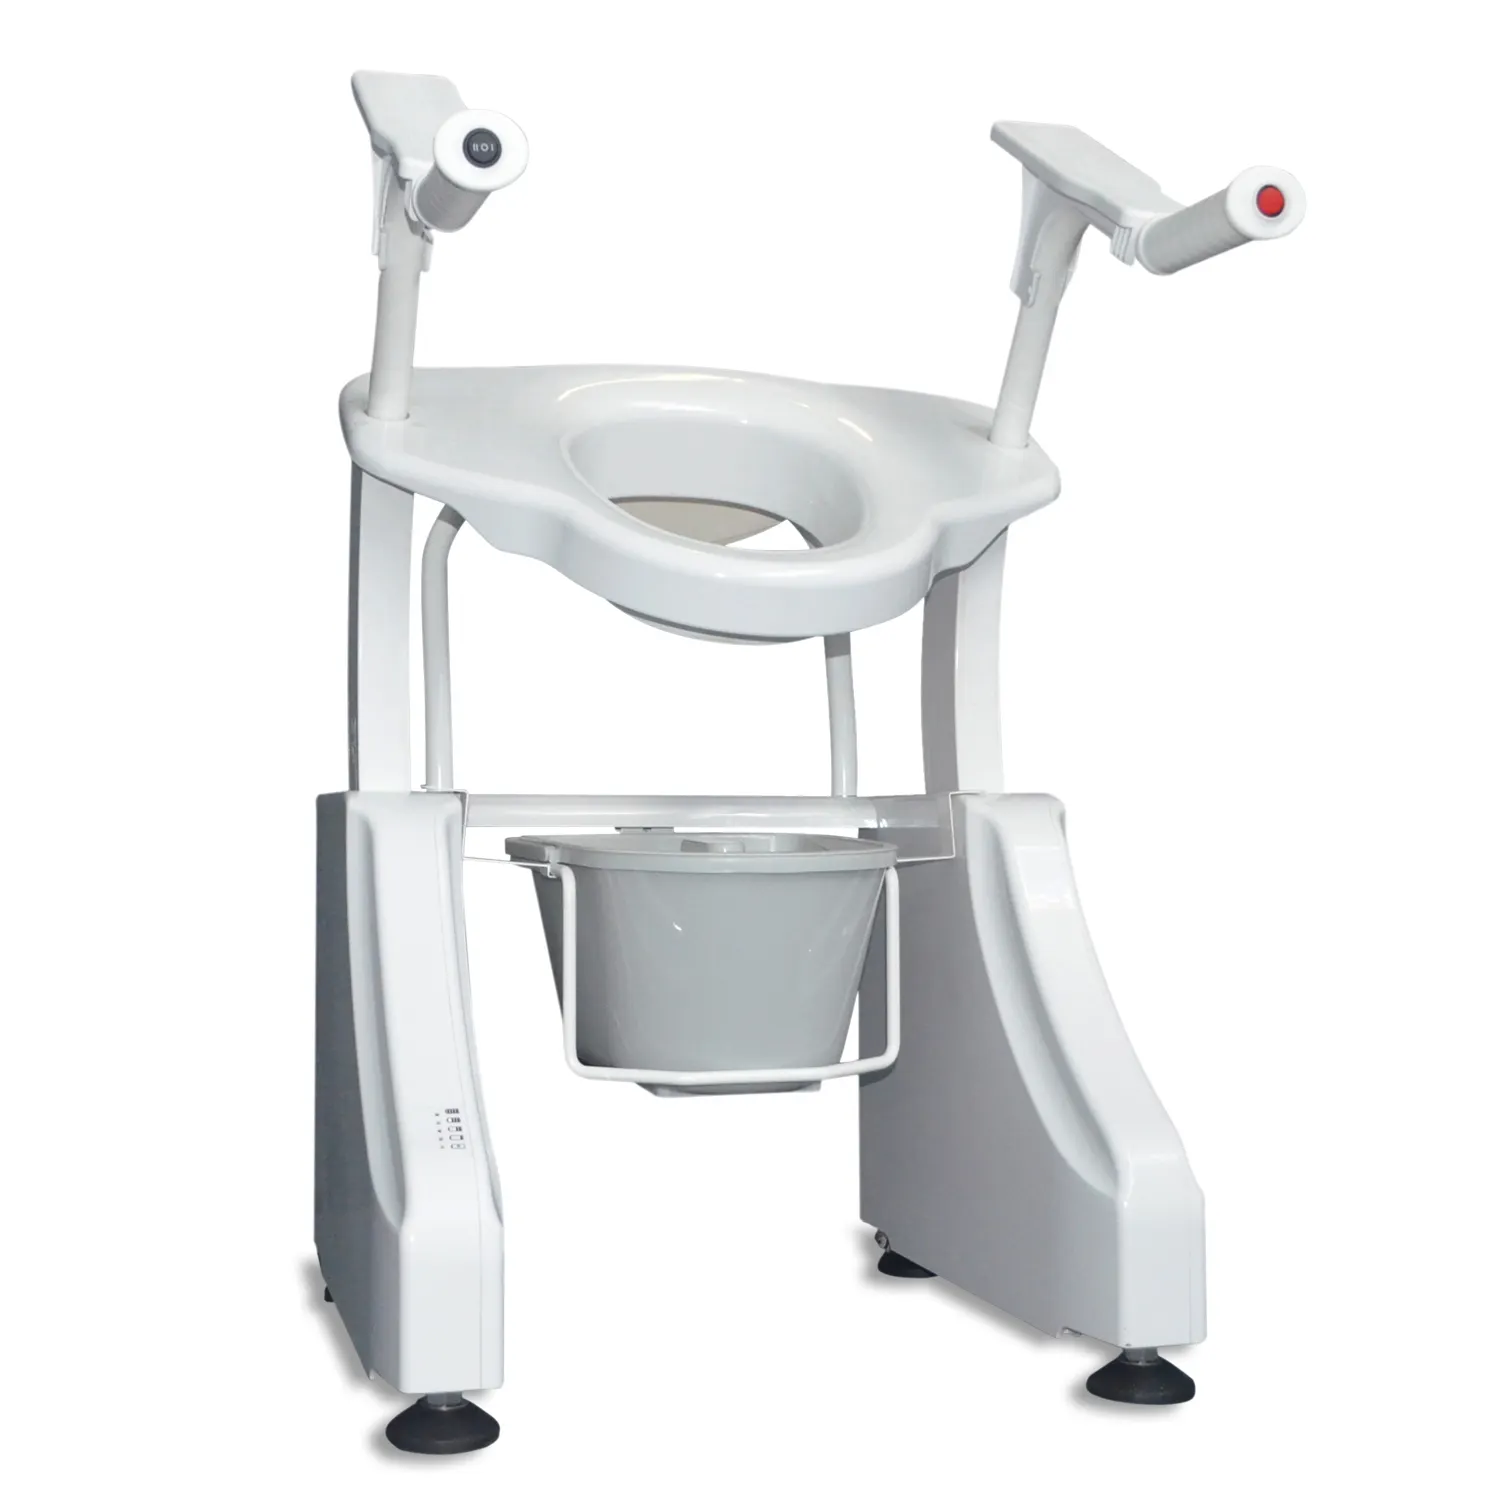 Electric Toilet Lift Seat with Handles, One Button Adjustable Height Intelligent Toilet Assisted Lift Mobility scooter